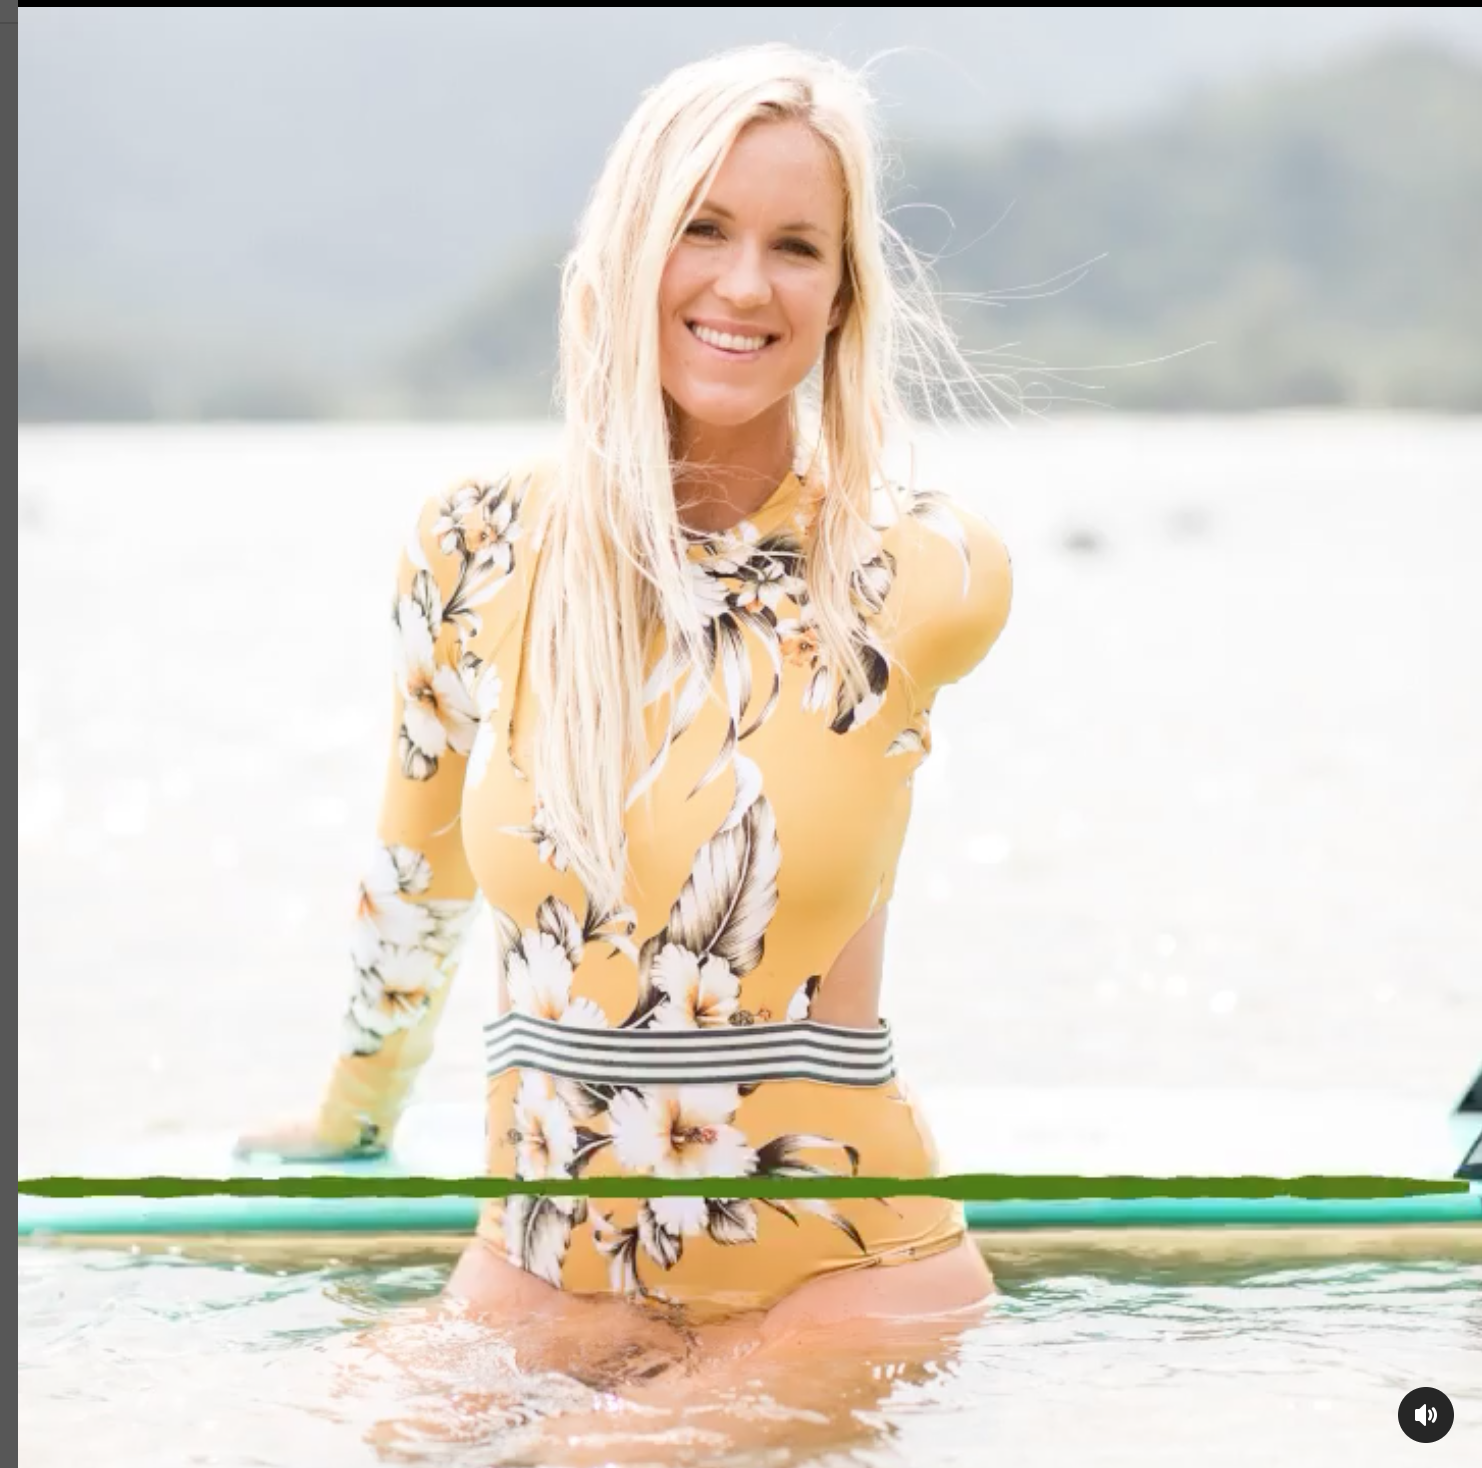 #109: ‘Soul Surfer’ Bethany Hamilton On Being ‘Unstoppable’